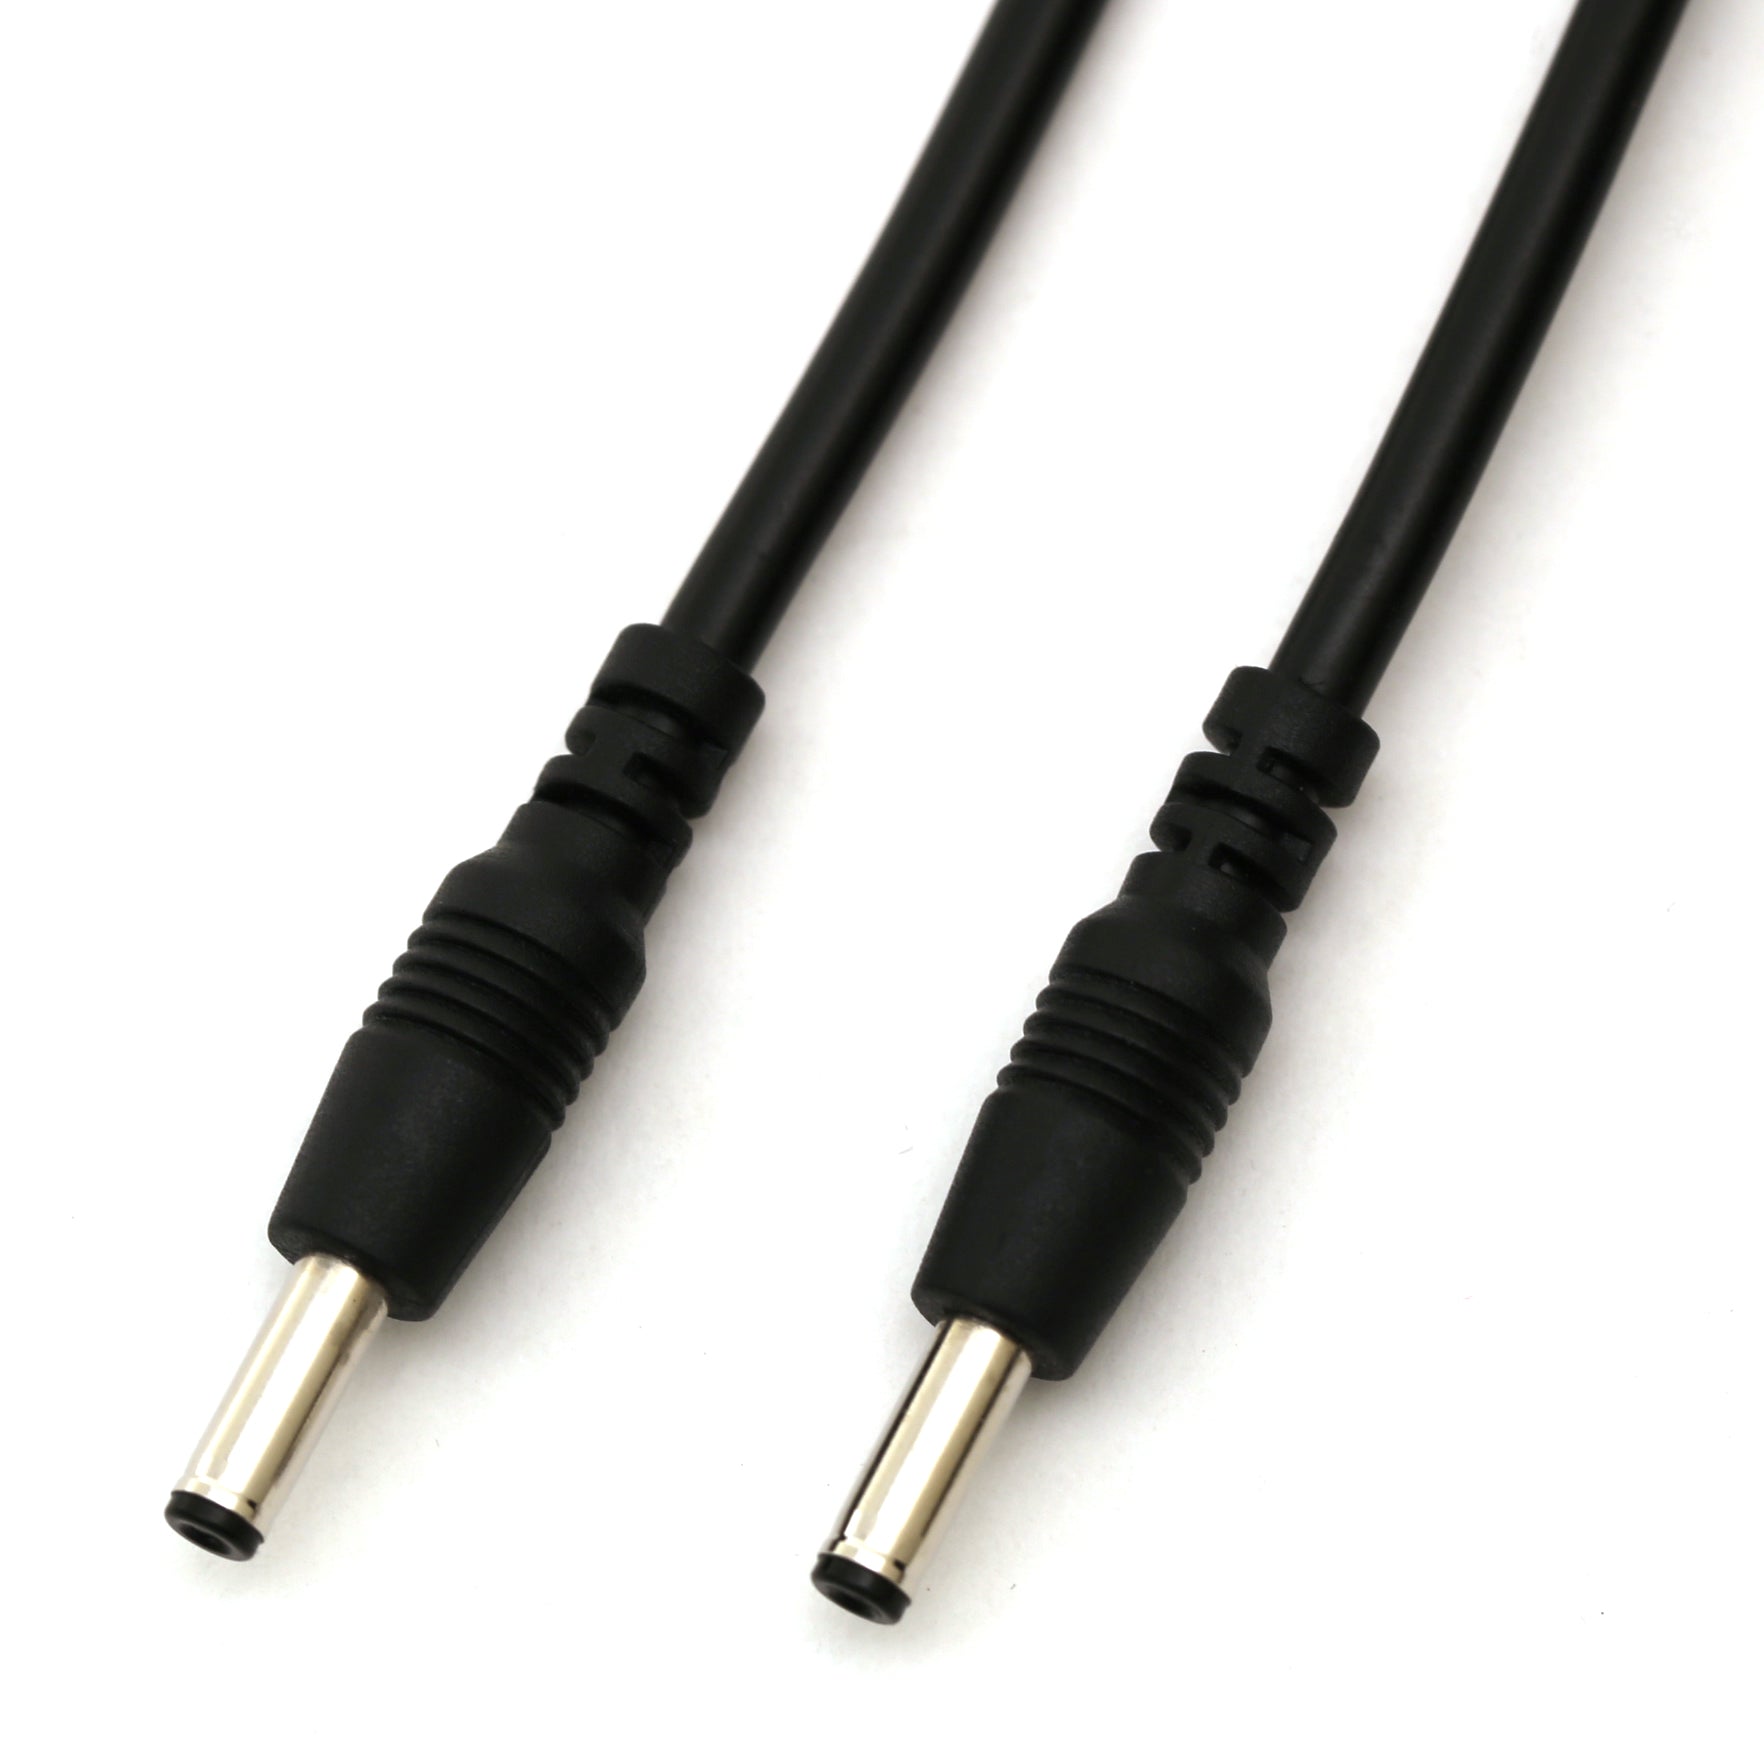 50ft In-Wall Rated Interconnect Cable for Modular LED Under Cabinet Lighting (Black)